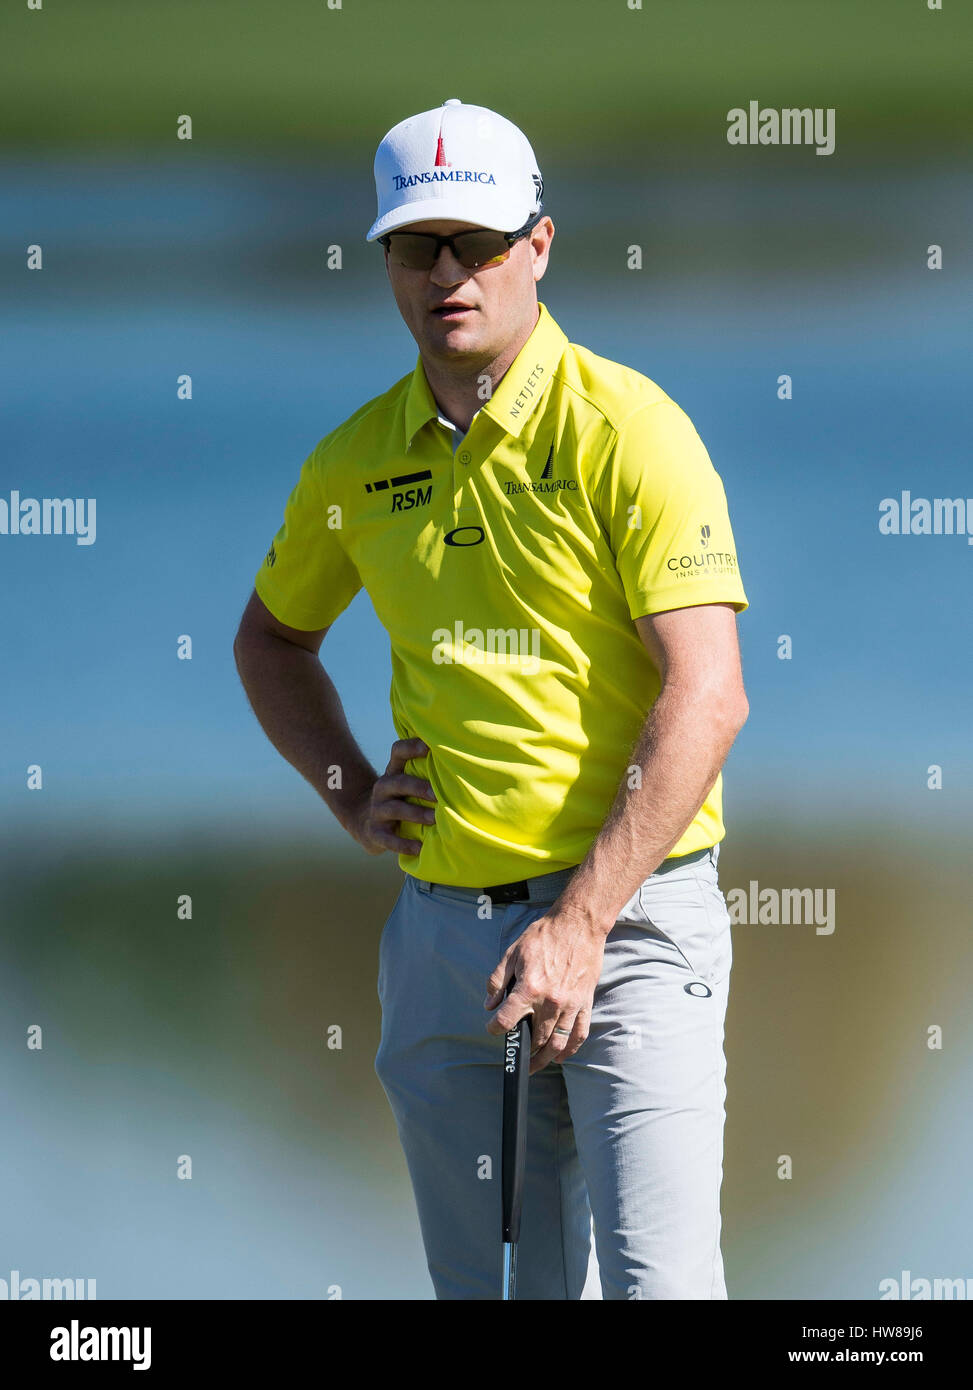 Zach Johnson High Resolution Stock Photography and Images - Alamy